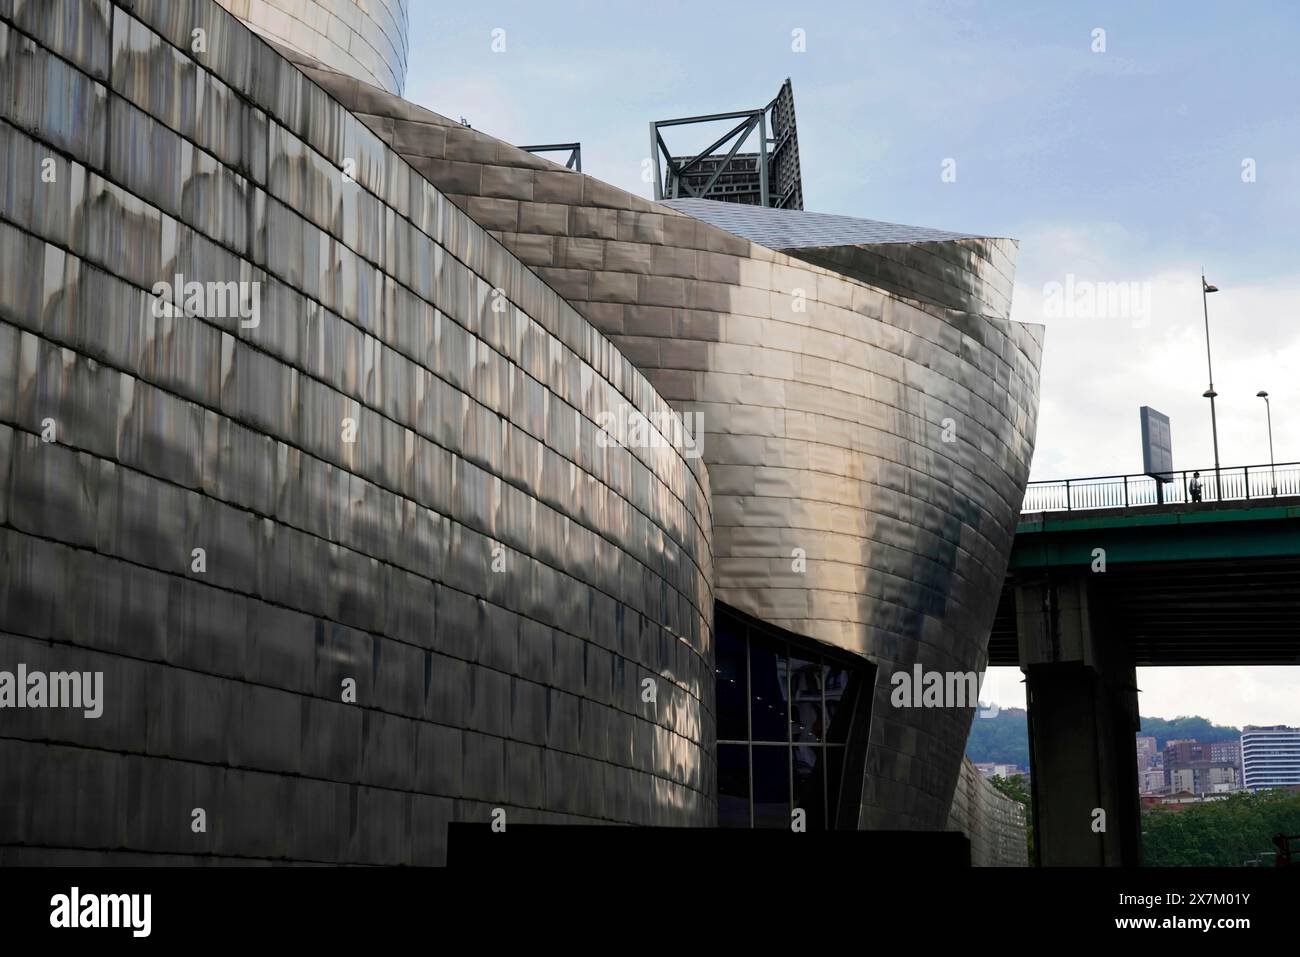 Guggenheim Museum Bilbao, Spain, Europe, Exterior view of a modern brushed steel building in an urban environment, Guggenheim Museum Bilbao on the Stock Photo